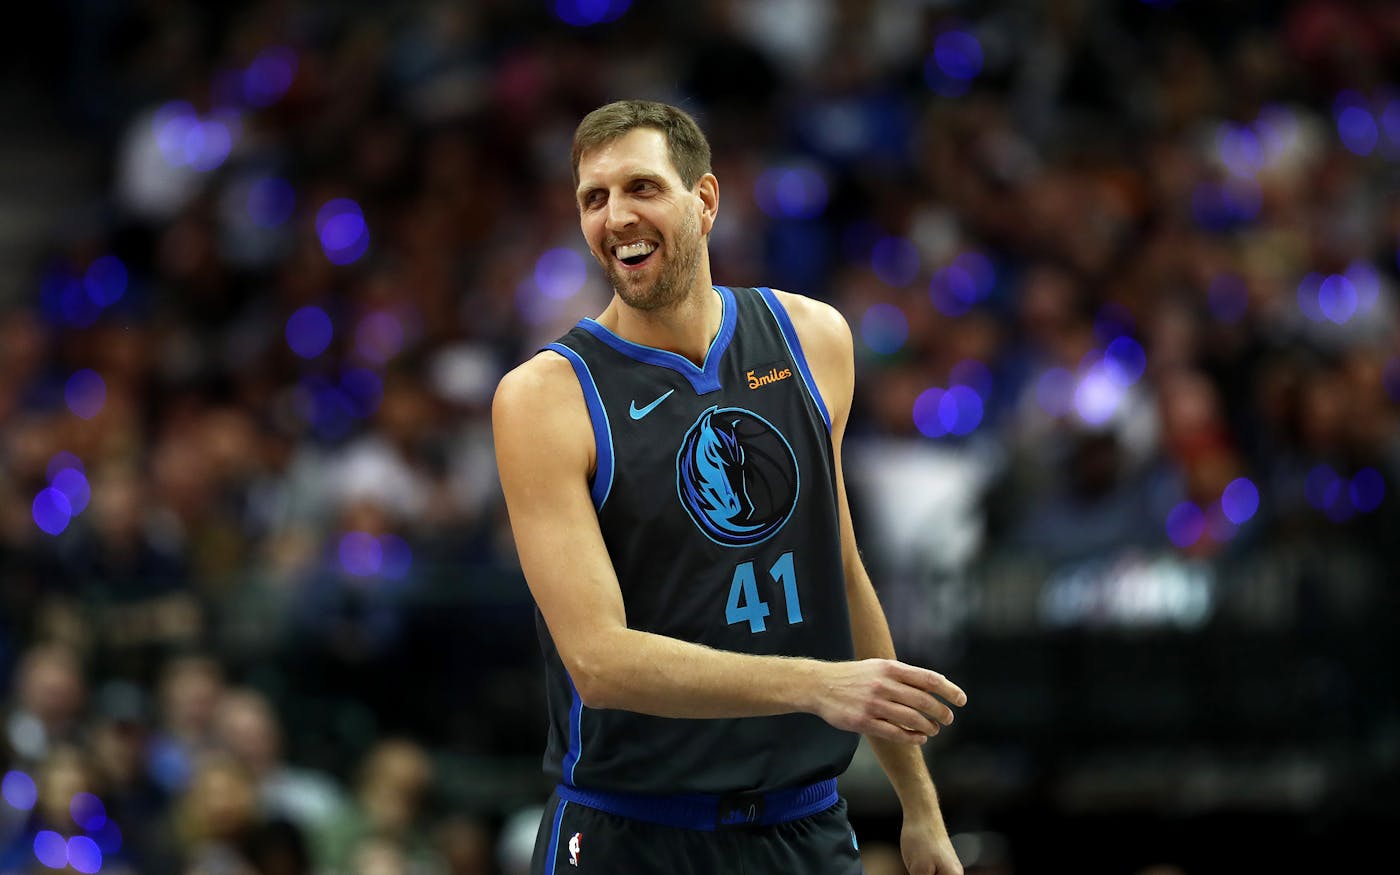 Purchase this signed Dirk Nowitzki jersey for $150! For more